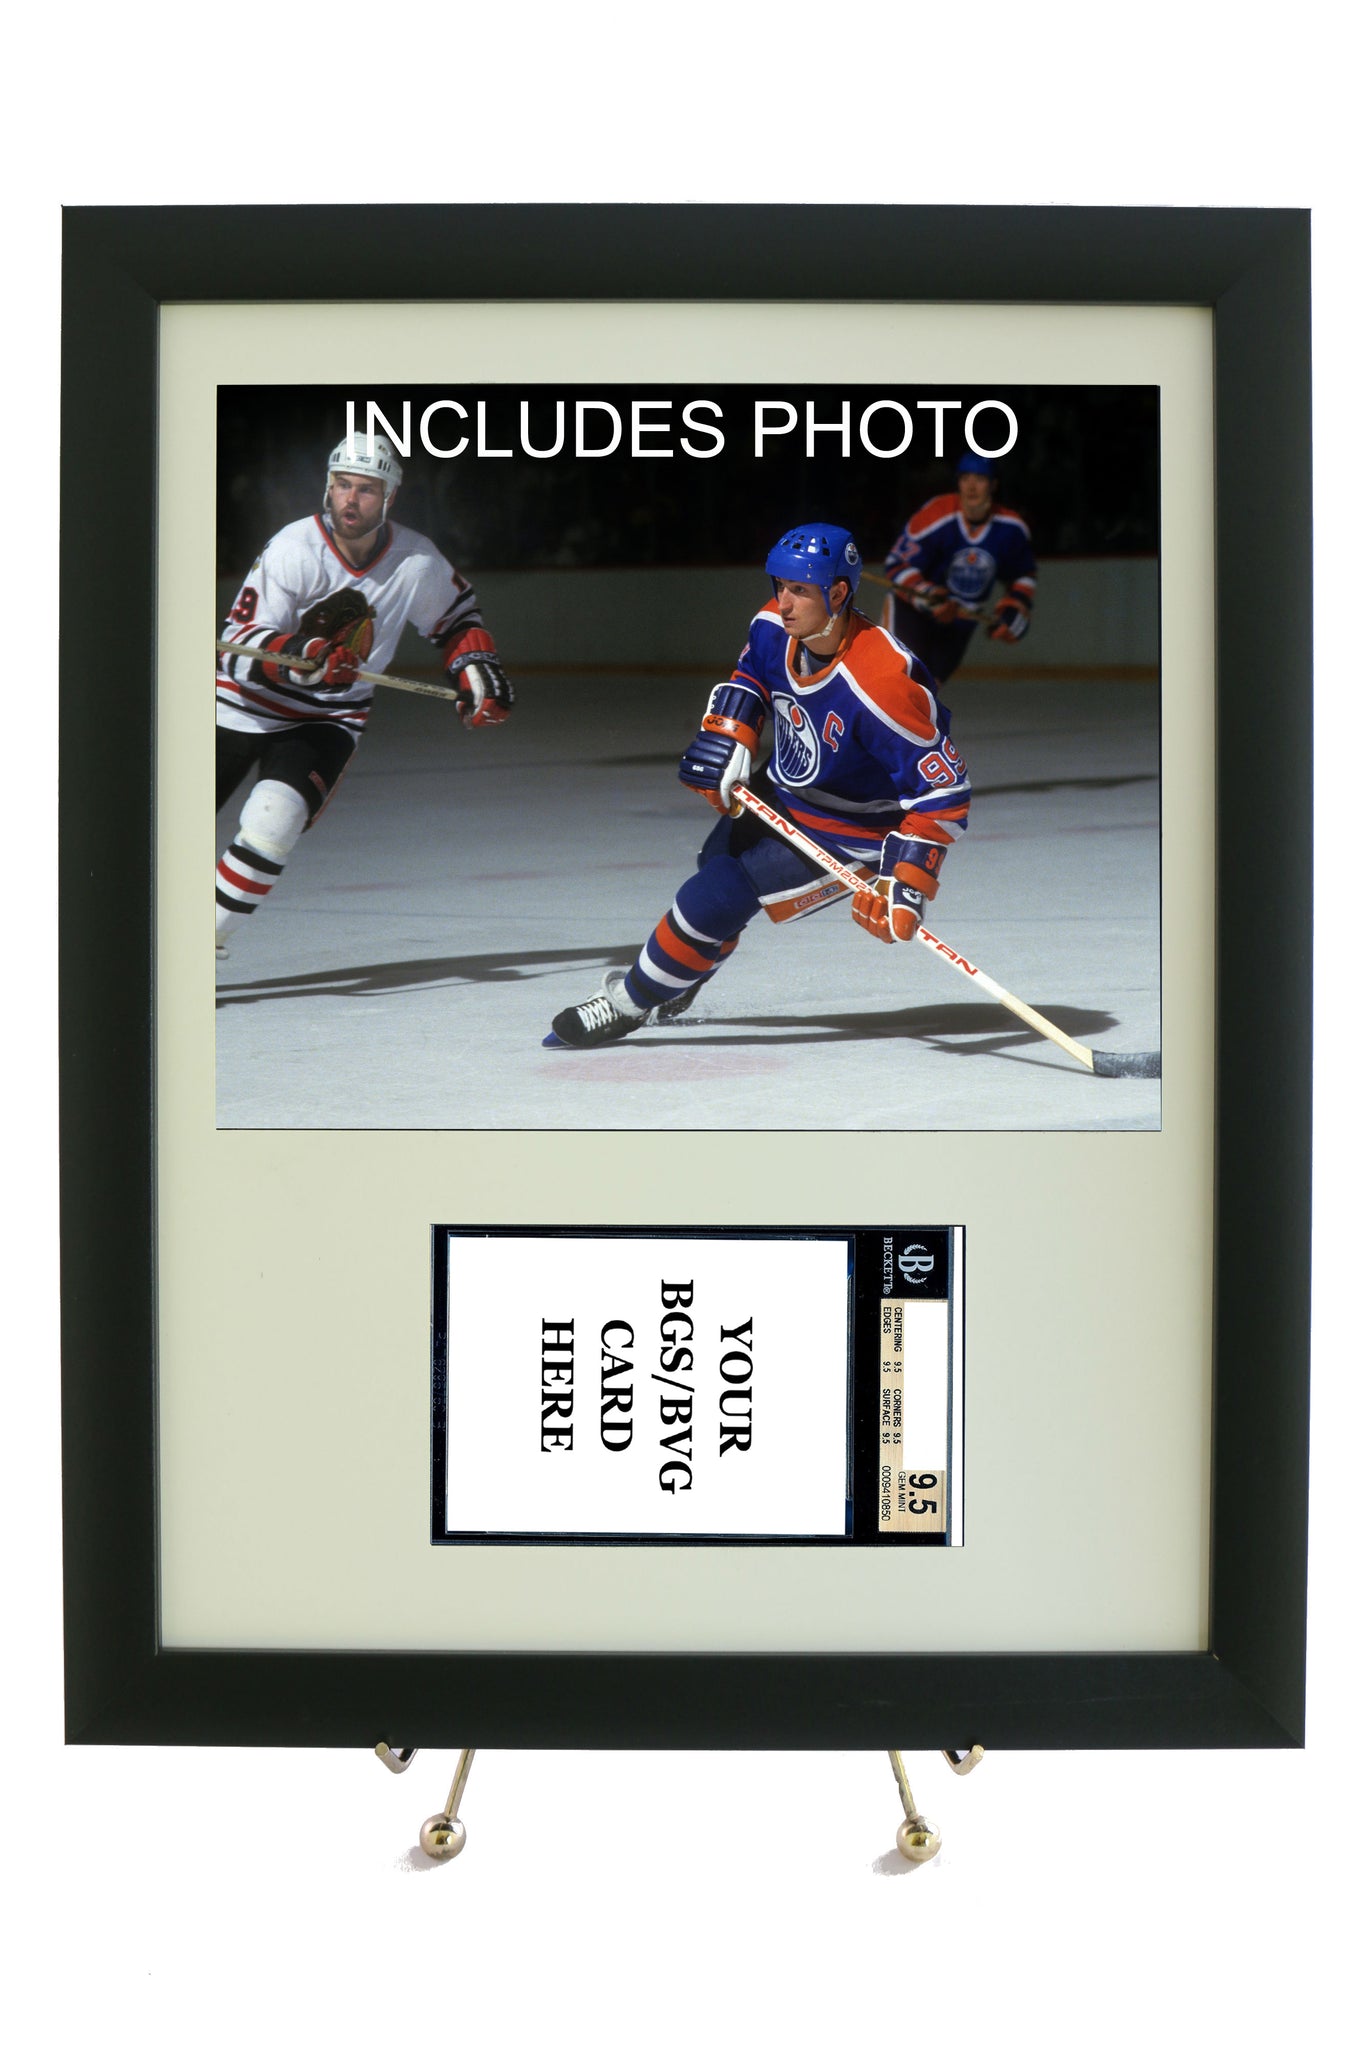 Graded Sports Card Frame for YOUR Wayne Gretzky Horizontal BGS Card (INCLUDES PHOTO) - Graded And Framed